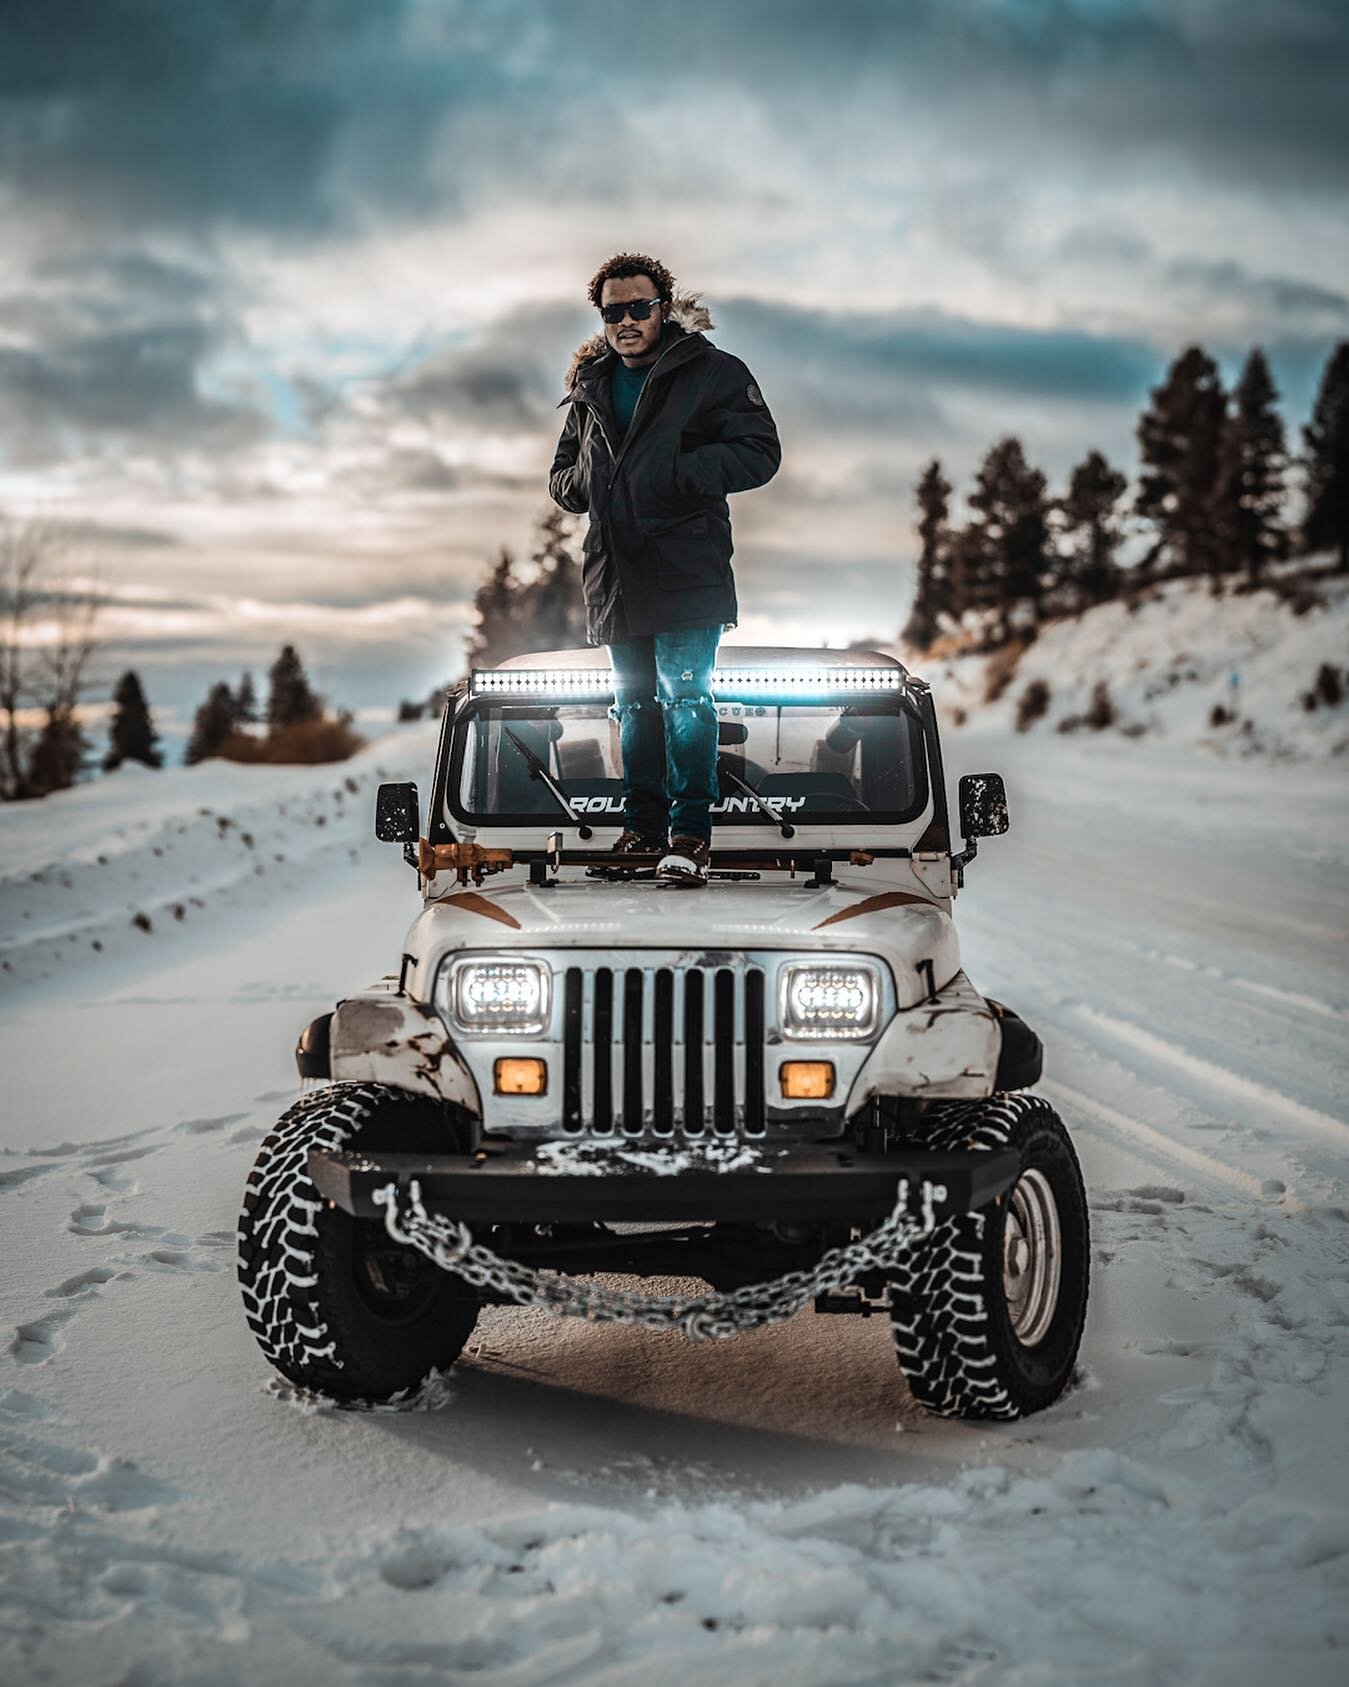 whatchu know bout the death wobble ⁣
⁣
⁣
⁣
⁣
⁣
⁣
⁣
#photooftheday #photography #portrait #sony #sonyalpha #sonya7iii #tone #vibes #photoshop #colors #gameoftones #travel #boise #idaho #grunge #colors #jeep #wrangler #snow #mountains #winter